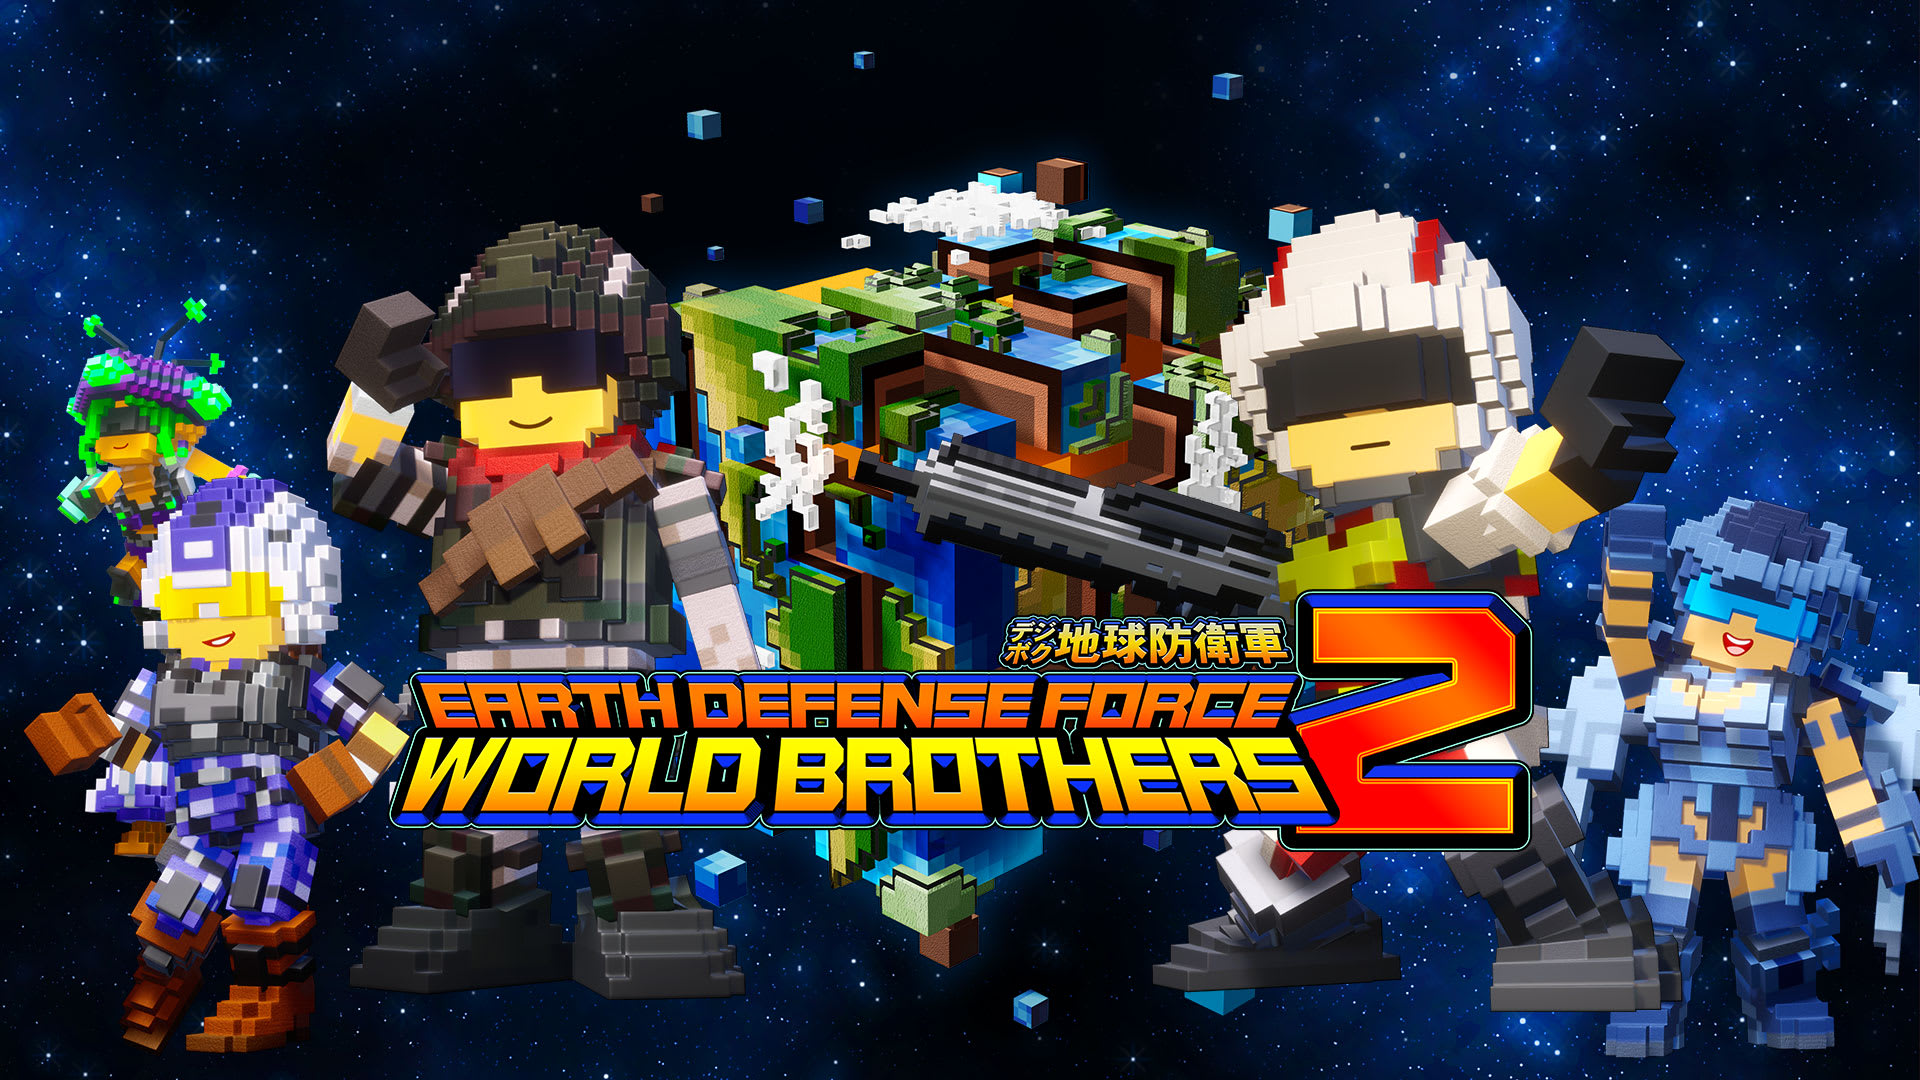 EARTH DEFENSE FORCE: WORLD BROTHERS 2 1